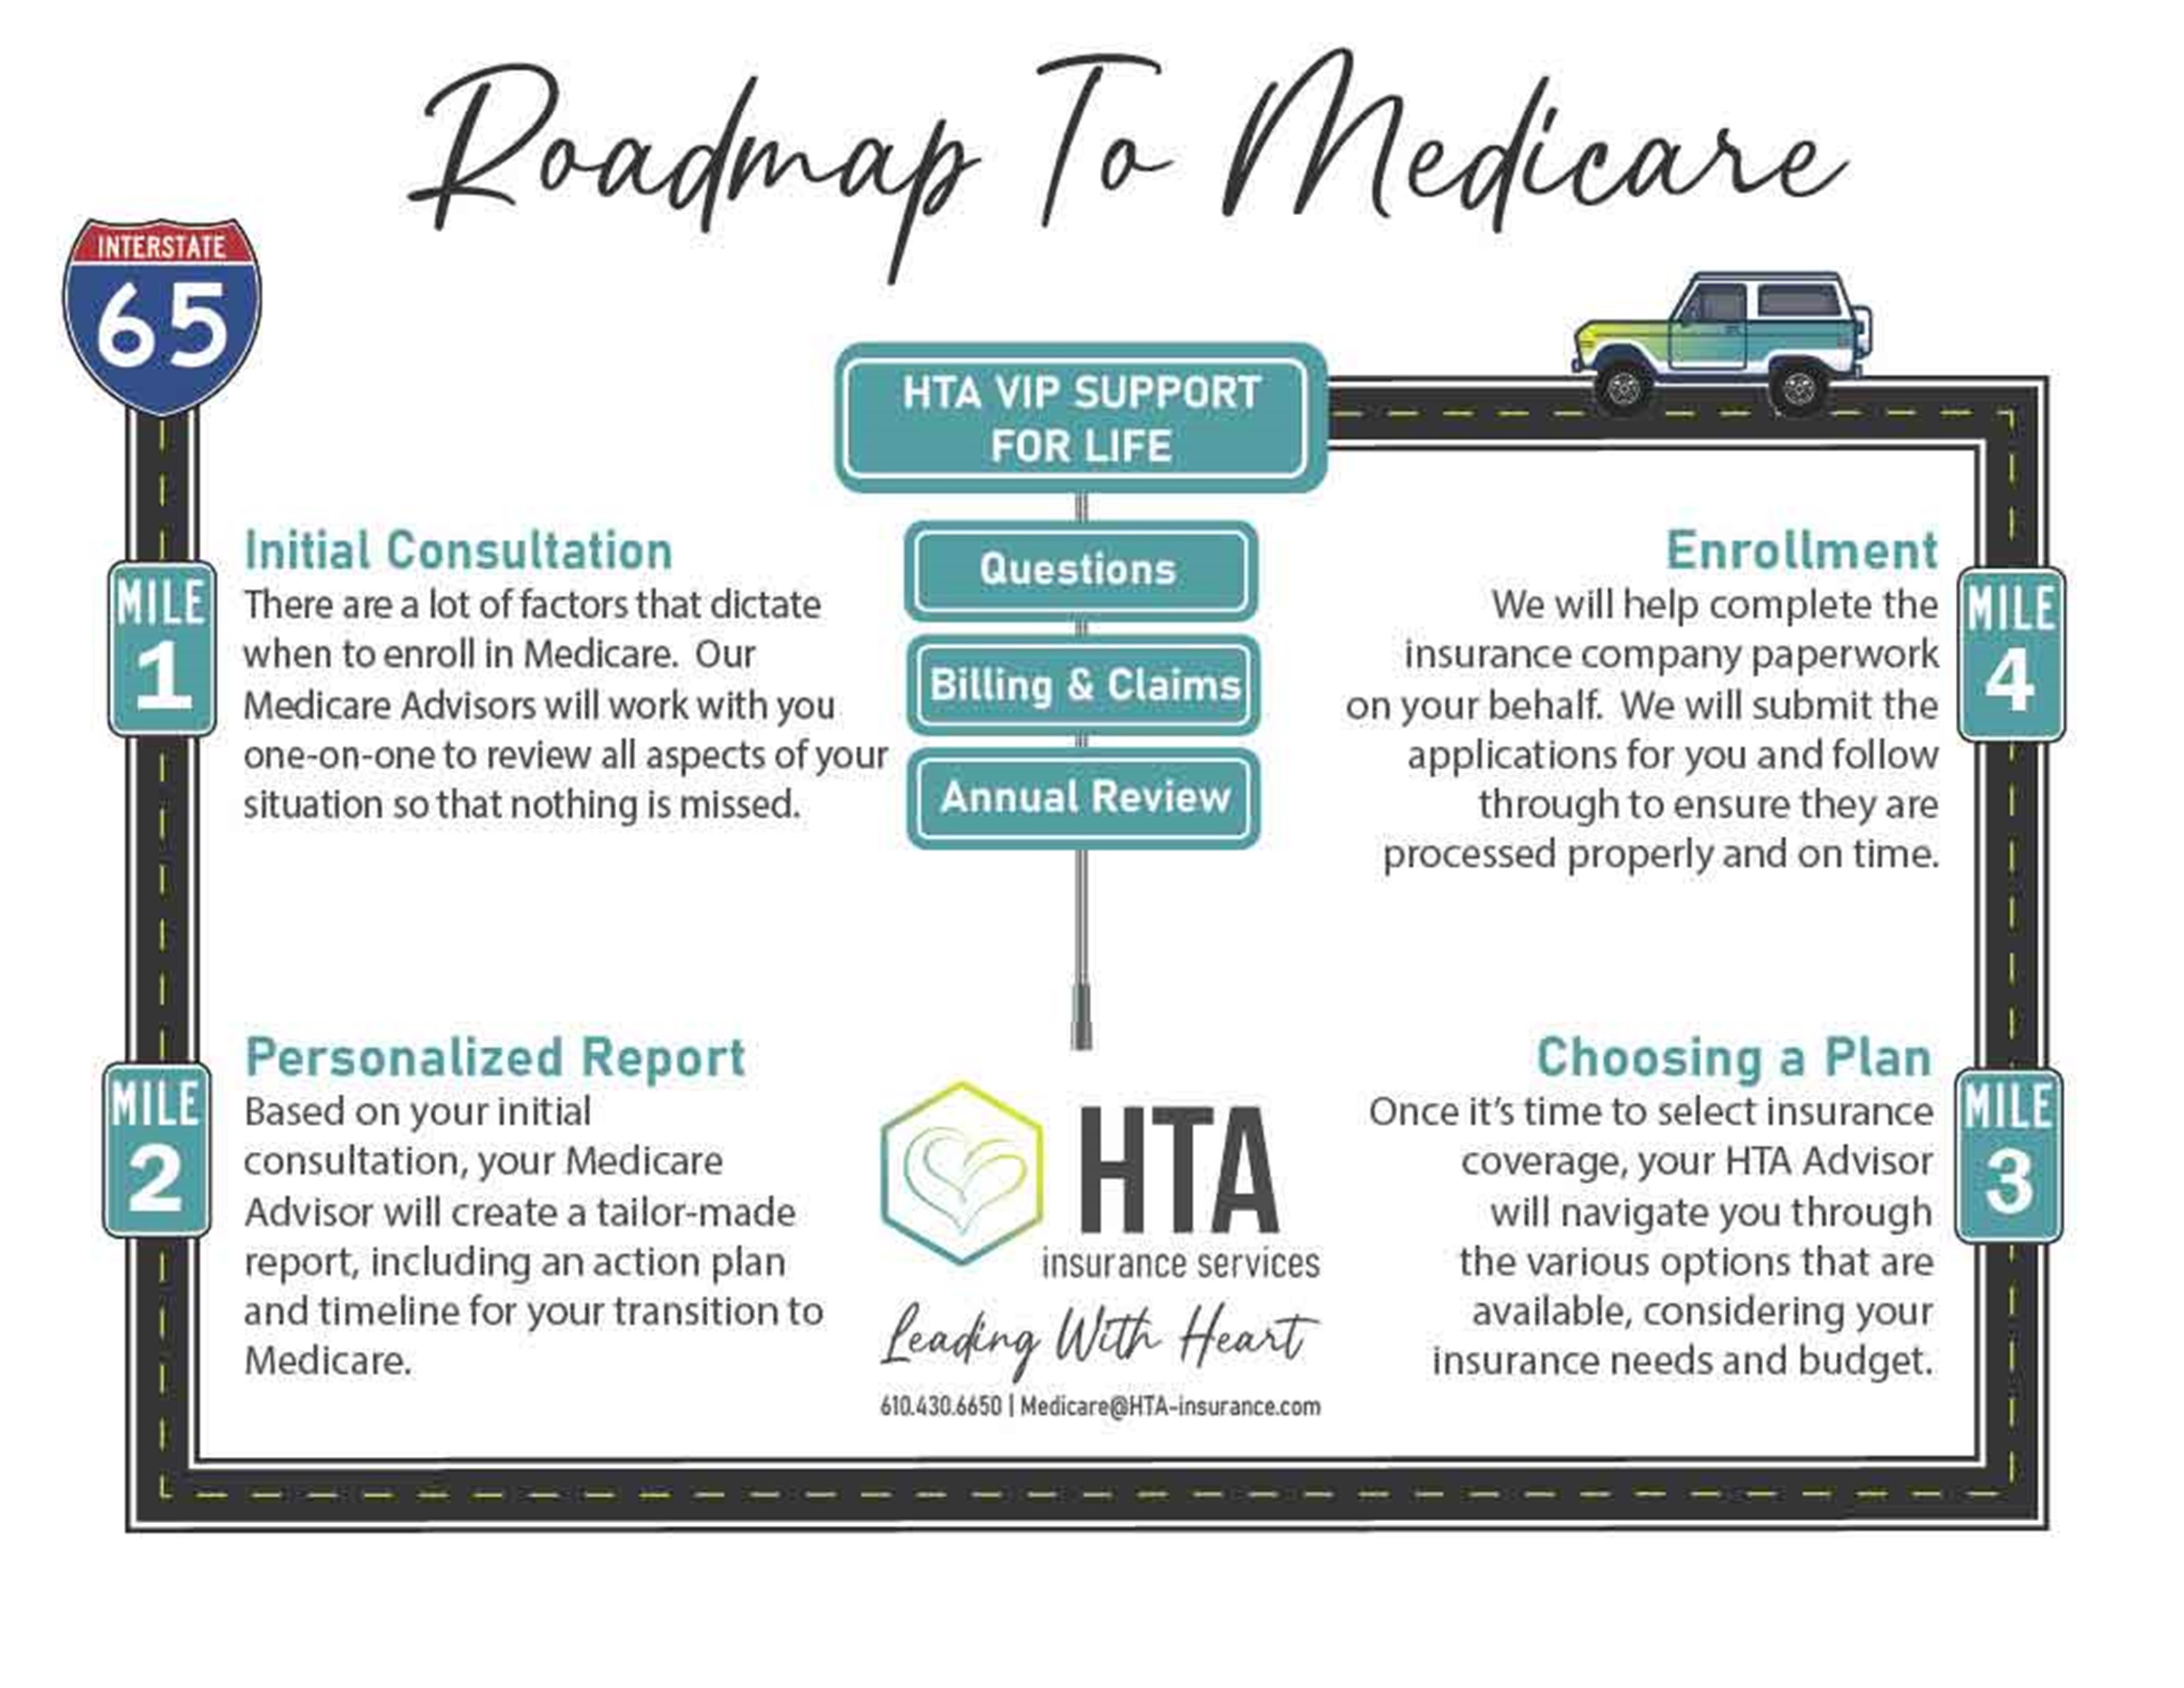 Schedule Your Roadmap to Medicare Consultation